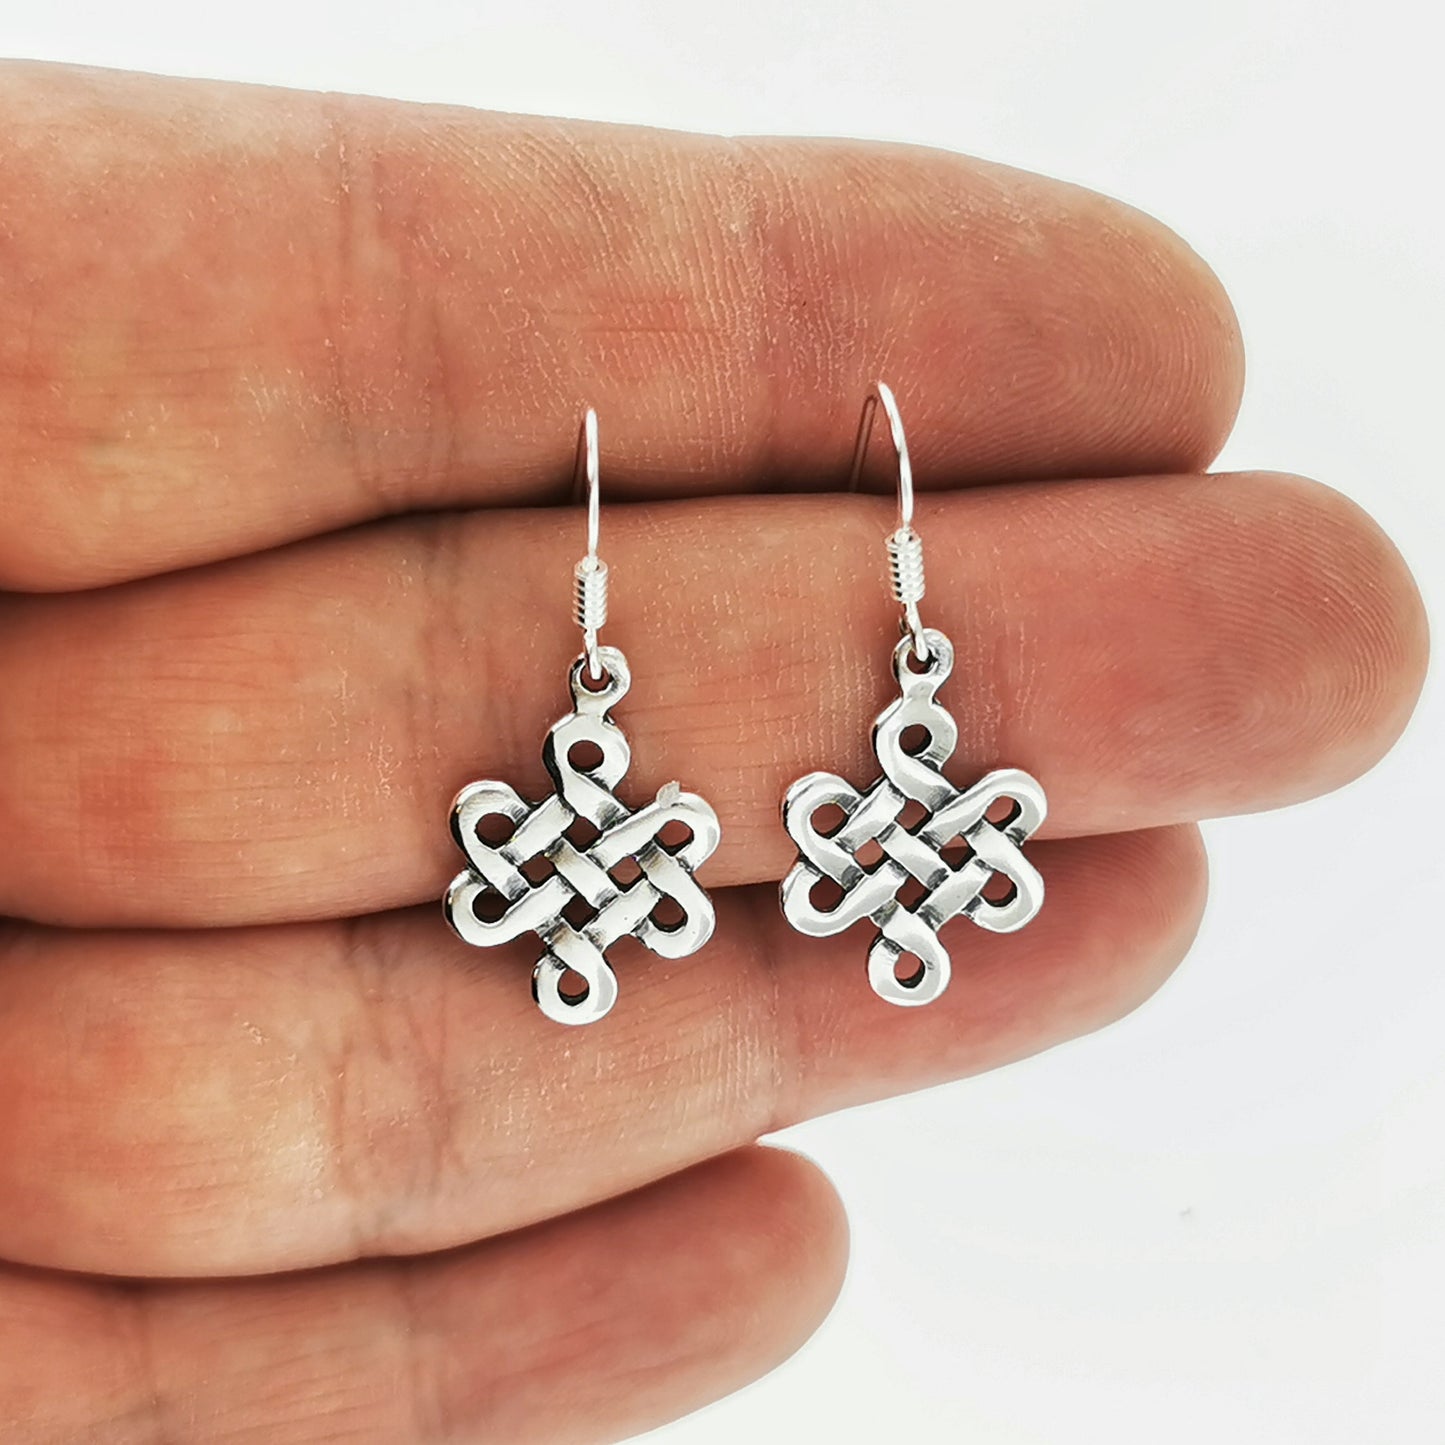 Small Endless Knot Earrings in Sterling Silver or Antique Bronze, Eternal knot Earrings, Shrivatsa Knot Earrings, Celtic Knot Earrings, Silver Endless Knot Earrings, Small Knot Earrings In Silver, Celtic Knot Earrings, Celtic Silver Jewellery